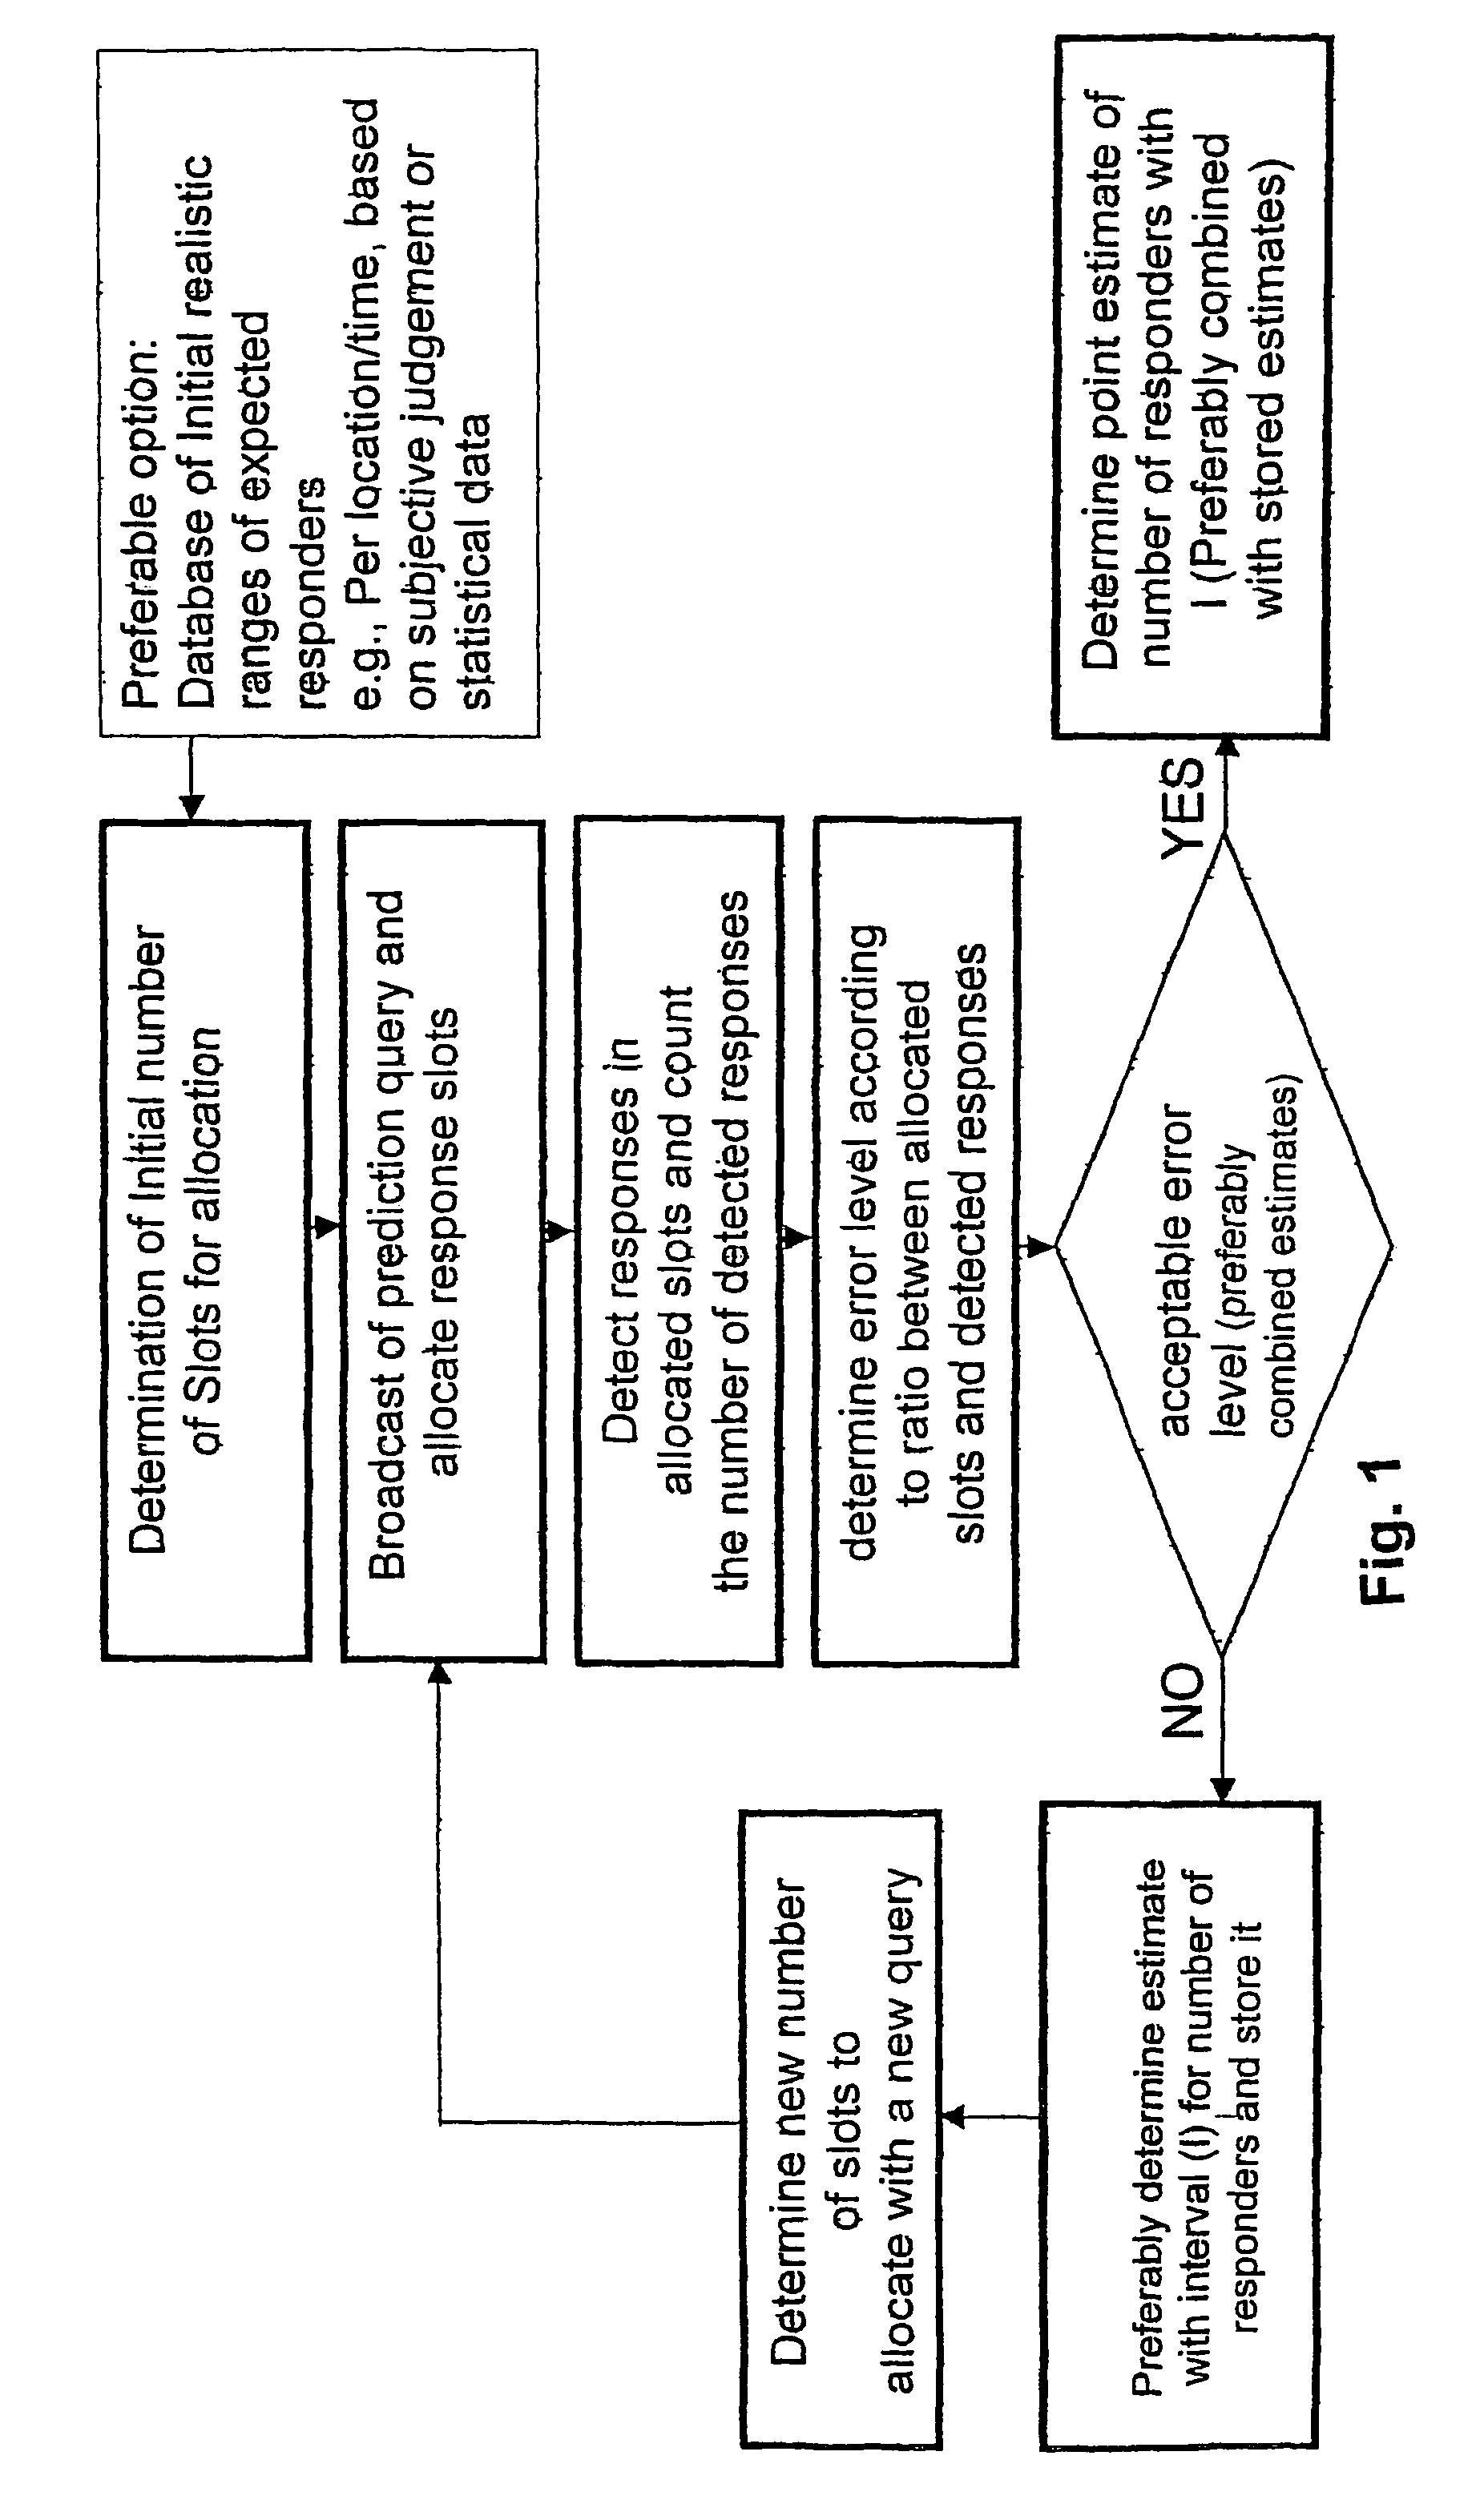 Method and system for mapping traffic predictions with respect to telematics and route guidance applications